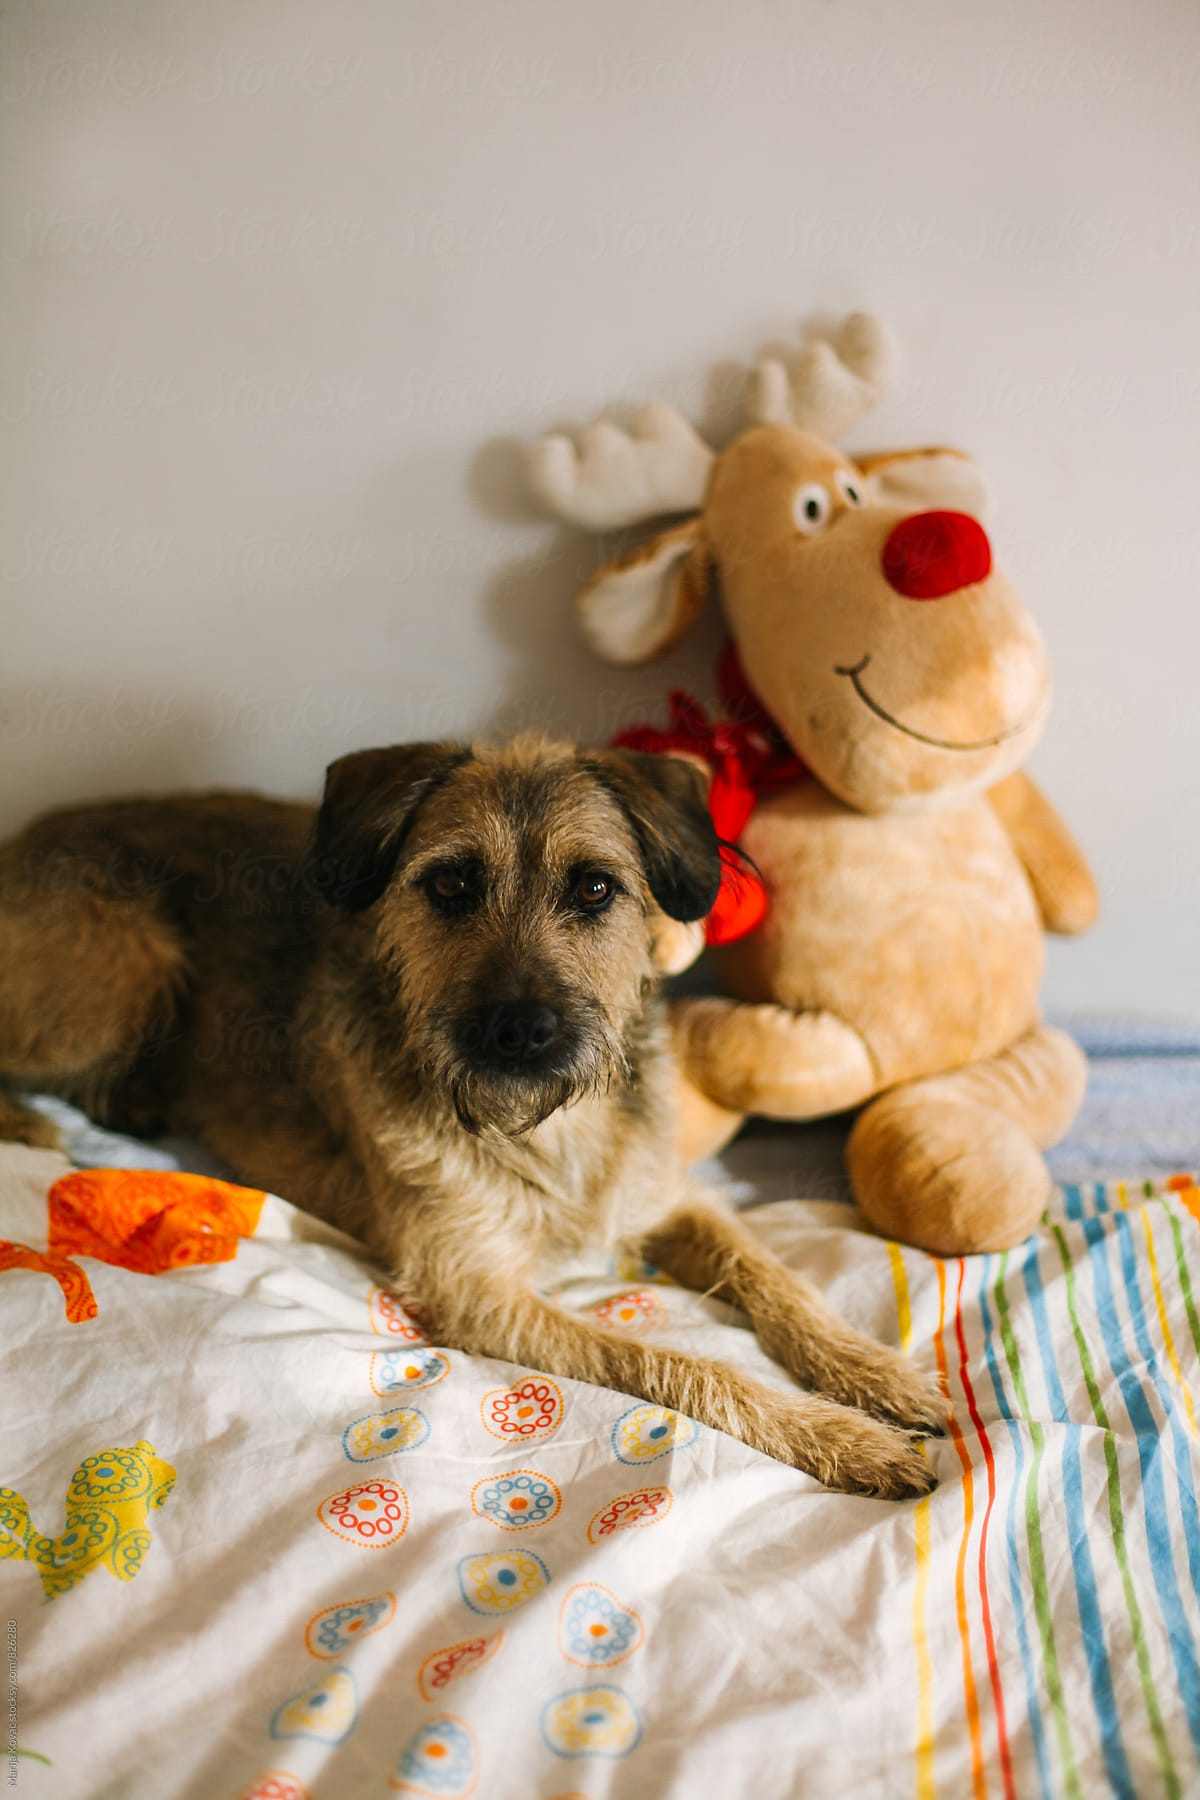 Cute dog lying with his reindeer toy - vertical